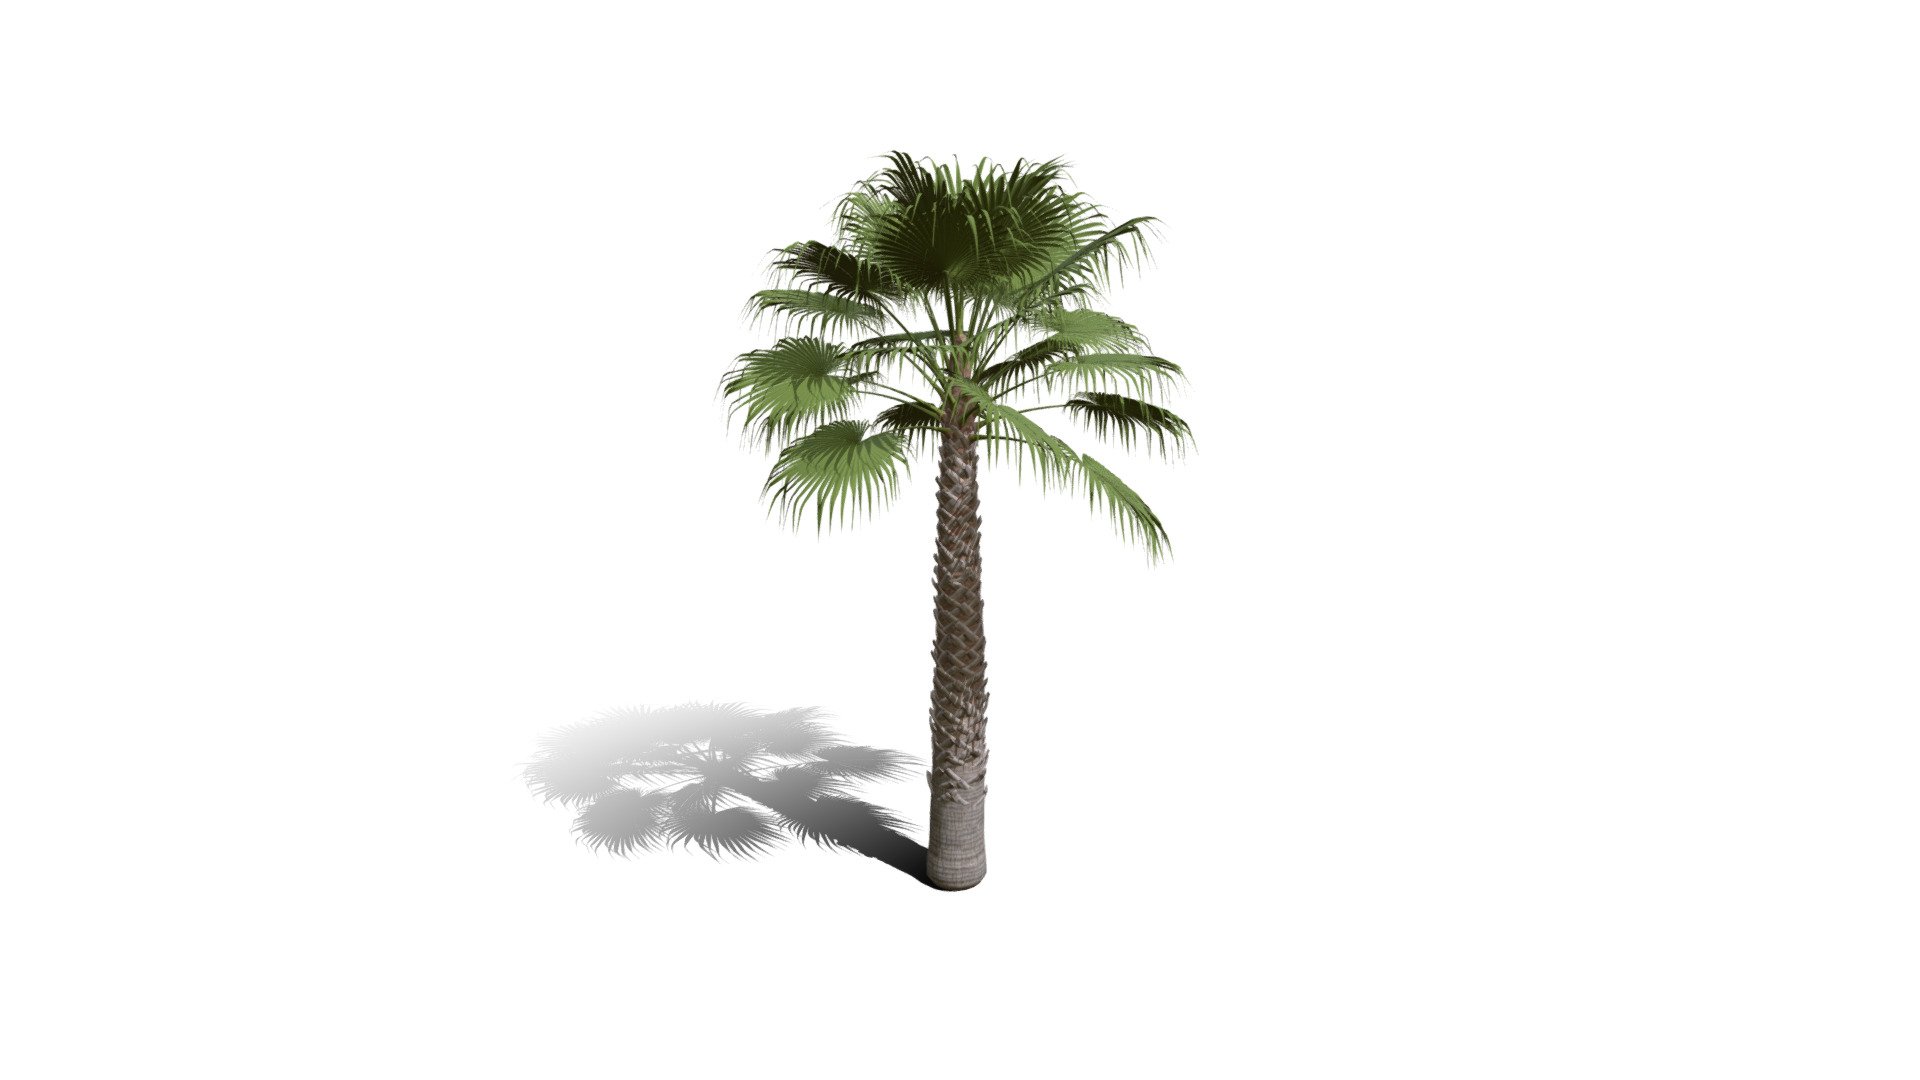 Model specs:





Species Latin name: Washingtonia filifera




Species Common name: California fan palm




Preset name: Urban 2 mat 25




Maturity stage: Juvenile




Health stage: Thriving




Season stage: Spring




Leaves count: 2600




Height: 7.9 meters




LODs included: Yes




Mesh type: static




Vertex colors: (R) Material blending, (A) Ambient occlusion



Better used for Hi Poly workflows!

Species description:





Origin: North America




Biomes: Desert,Scrubland




Climatic Zones: Mediterranean,Subtropical,Tropical




Plant type: Palm



This PlantCatalog mesh was exported at 40% of its maximum mesh resolution. With the full PlantCatalog, customize hundreds of procedural models + apply wind animations + convert to native shaders and a lot more: https://info.e-onsoftware.com/plantcatalog/ - Realistic HD California fan palm (17/25) - Buy Royalty Free 3D model by PlantCatalog 3d model